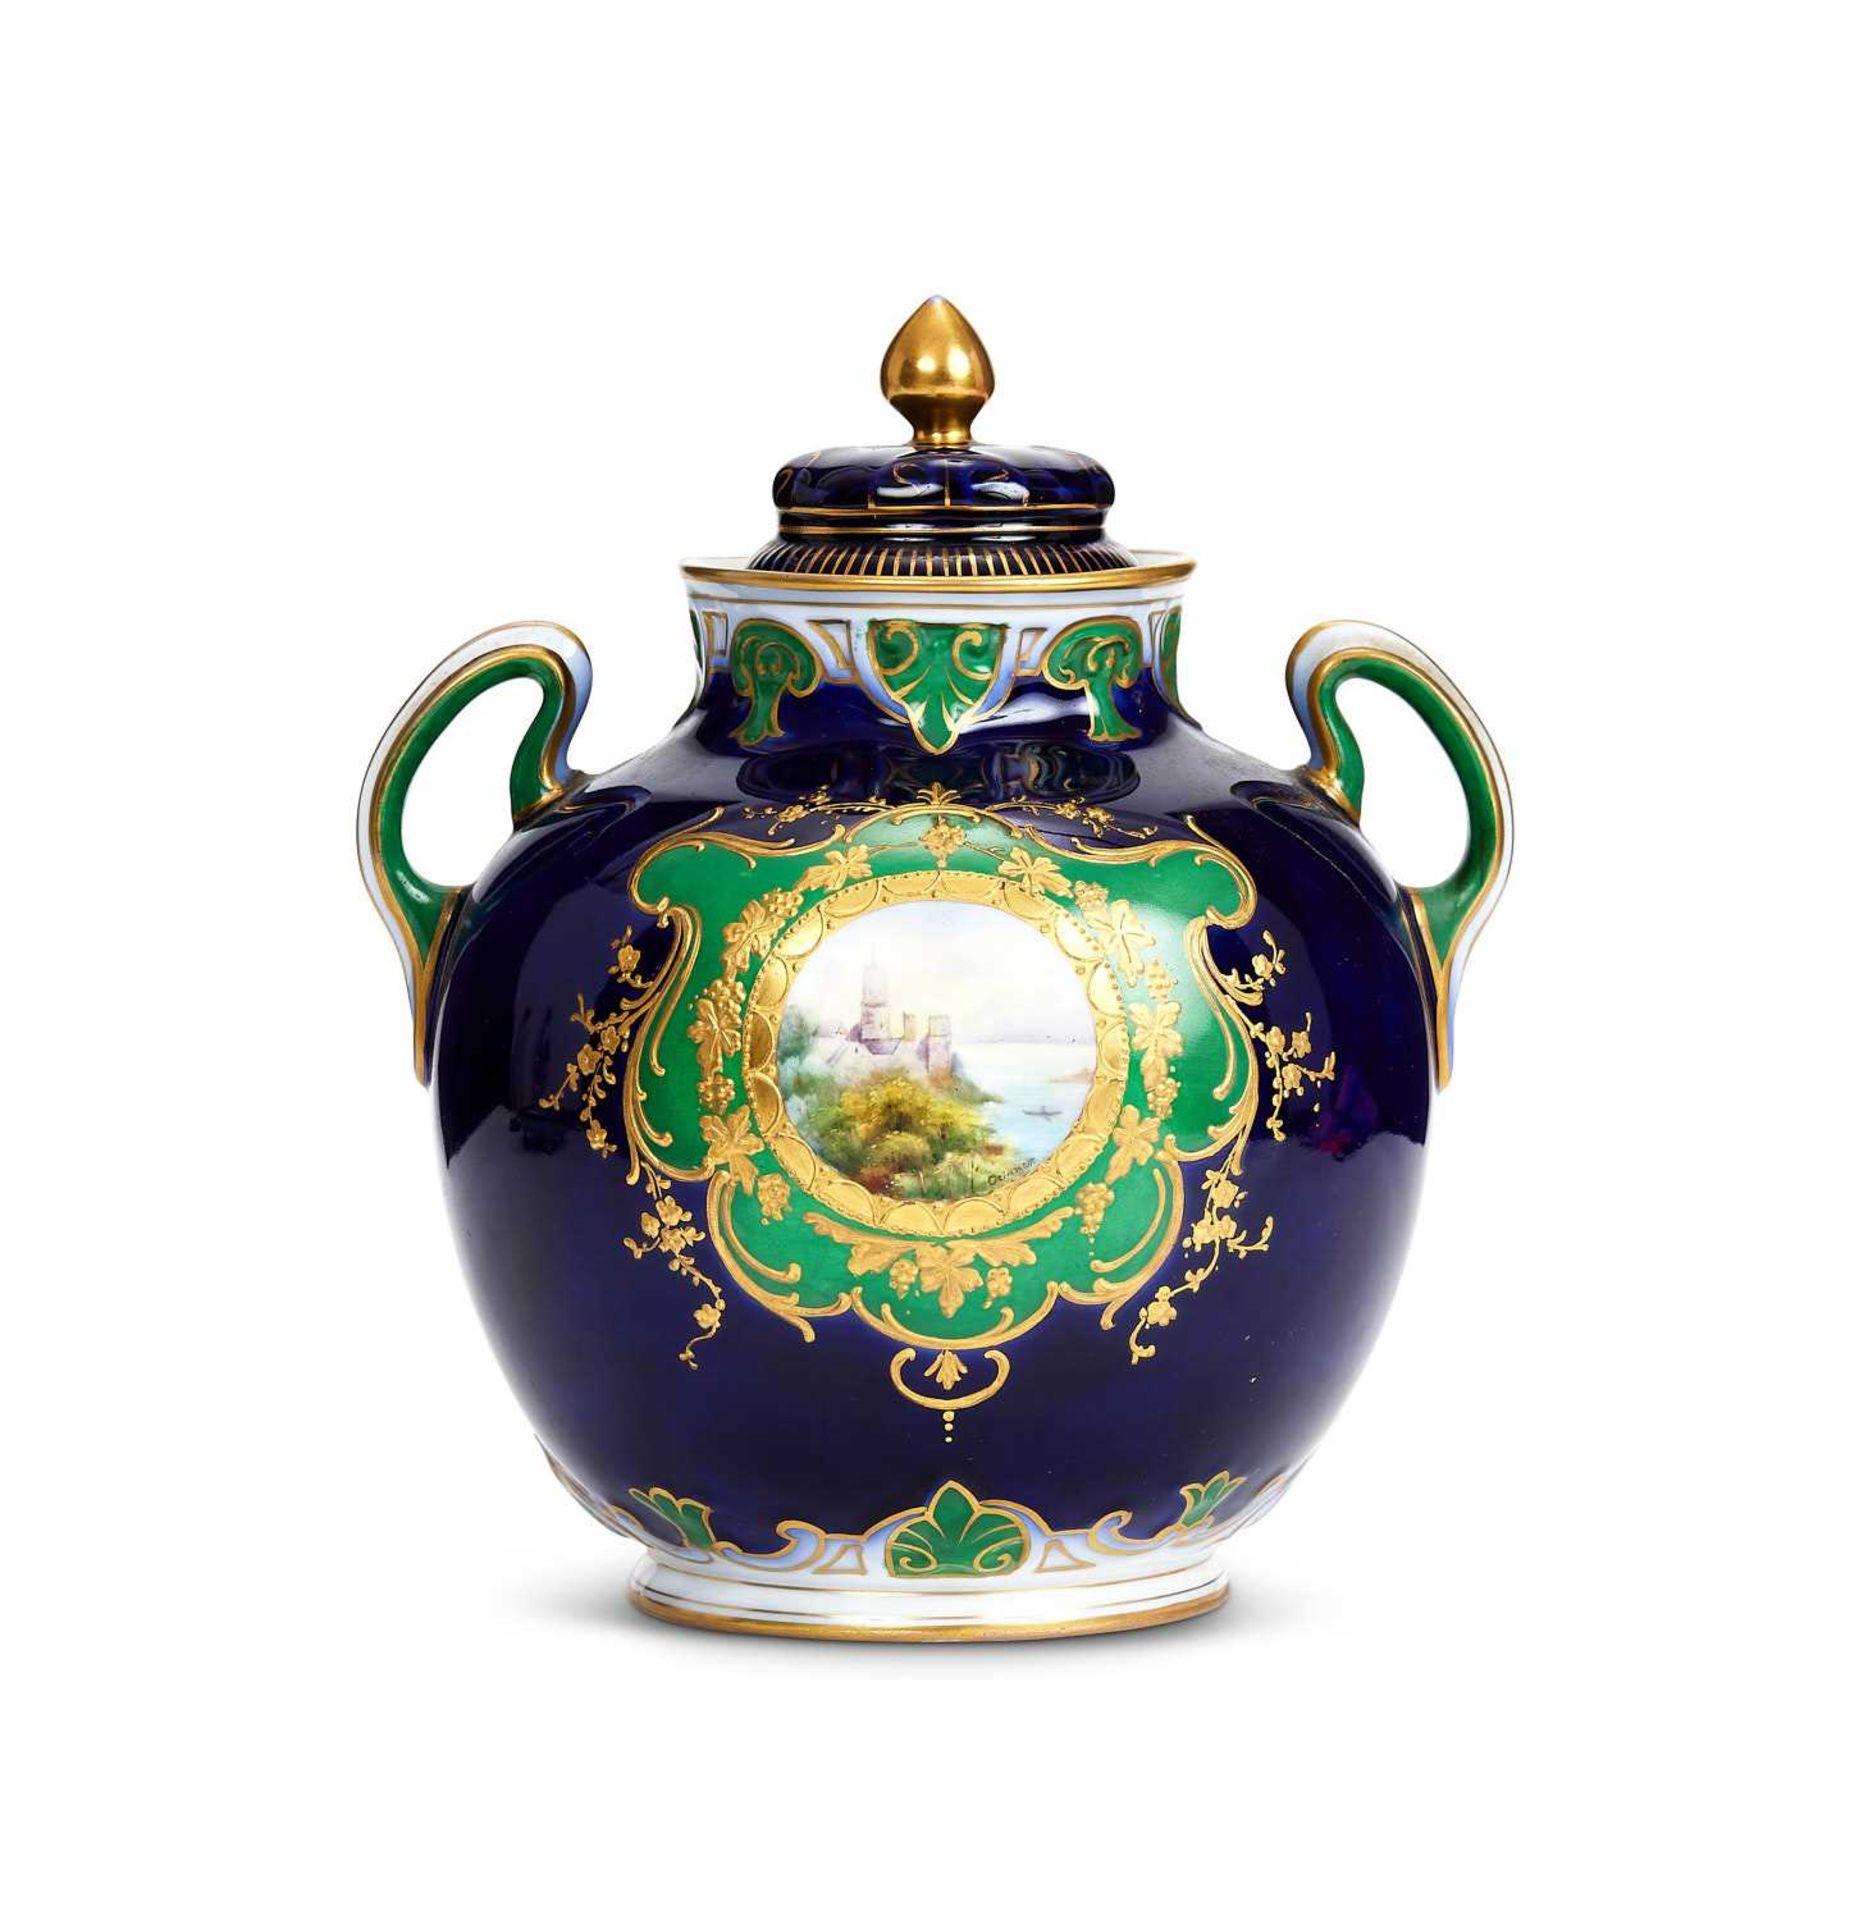 A LATE 19TH / EARLY 20TH CENTURY SEVRES STYLE PORCELAIN JAR AND COVER